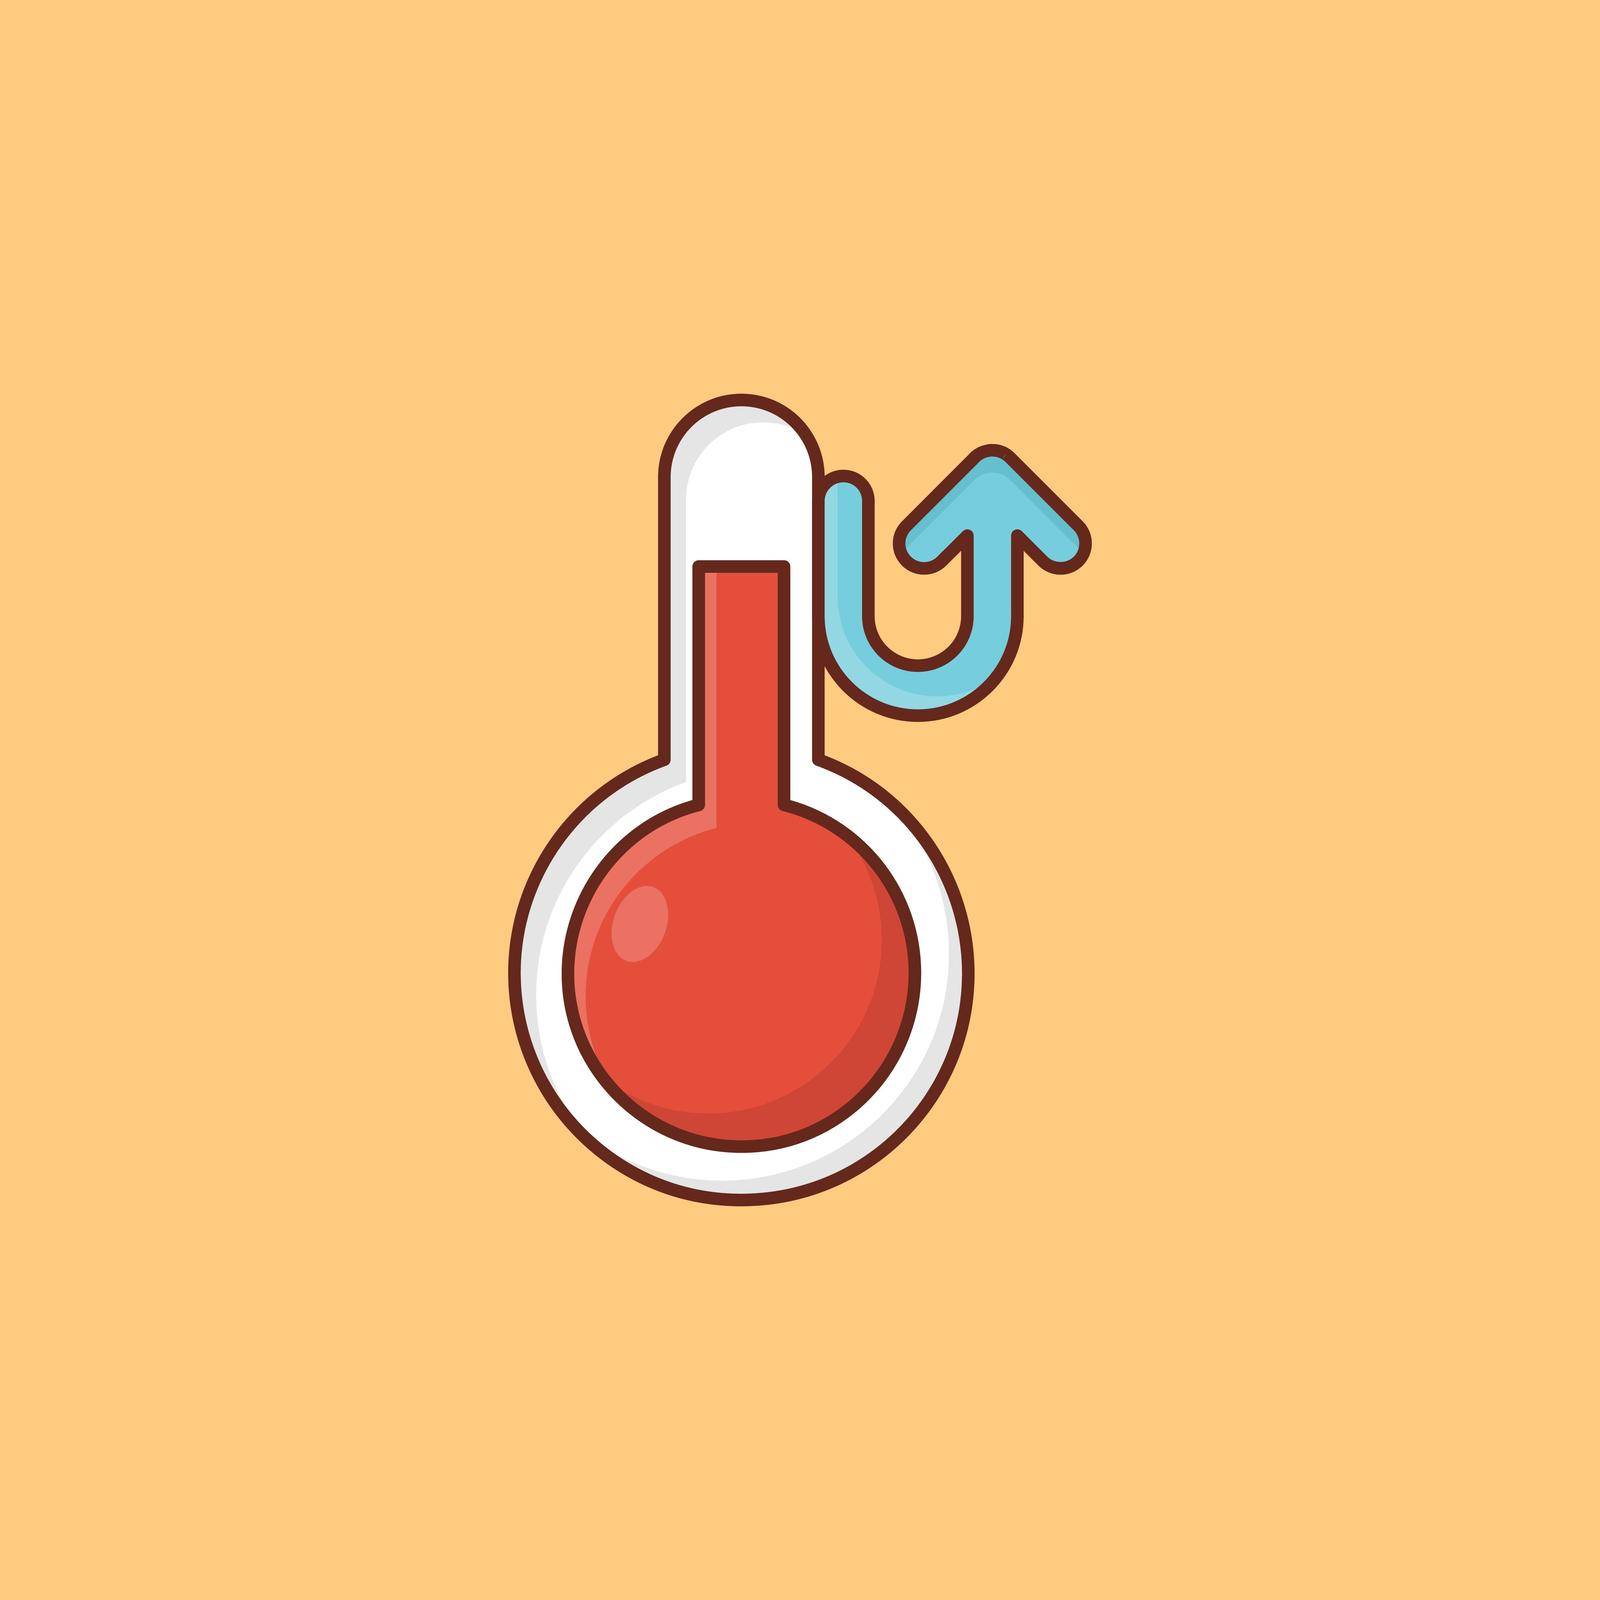 hot by FlaticonsDesign